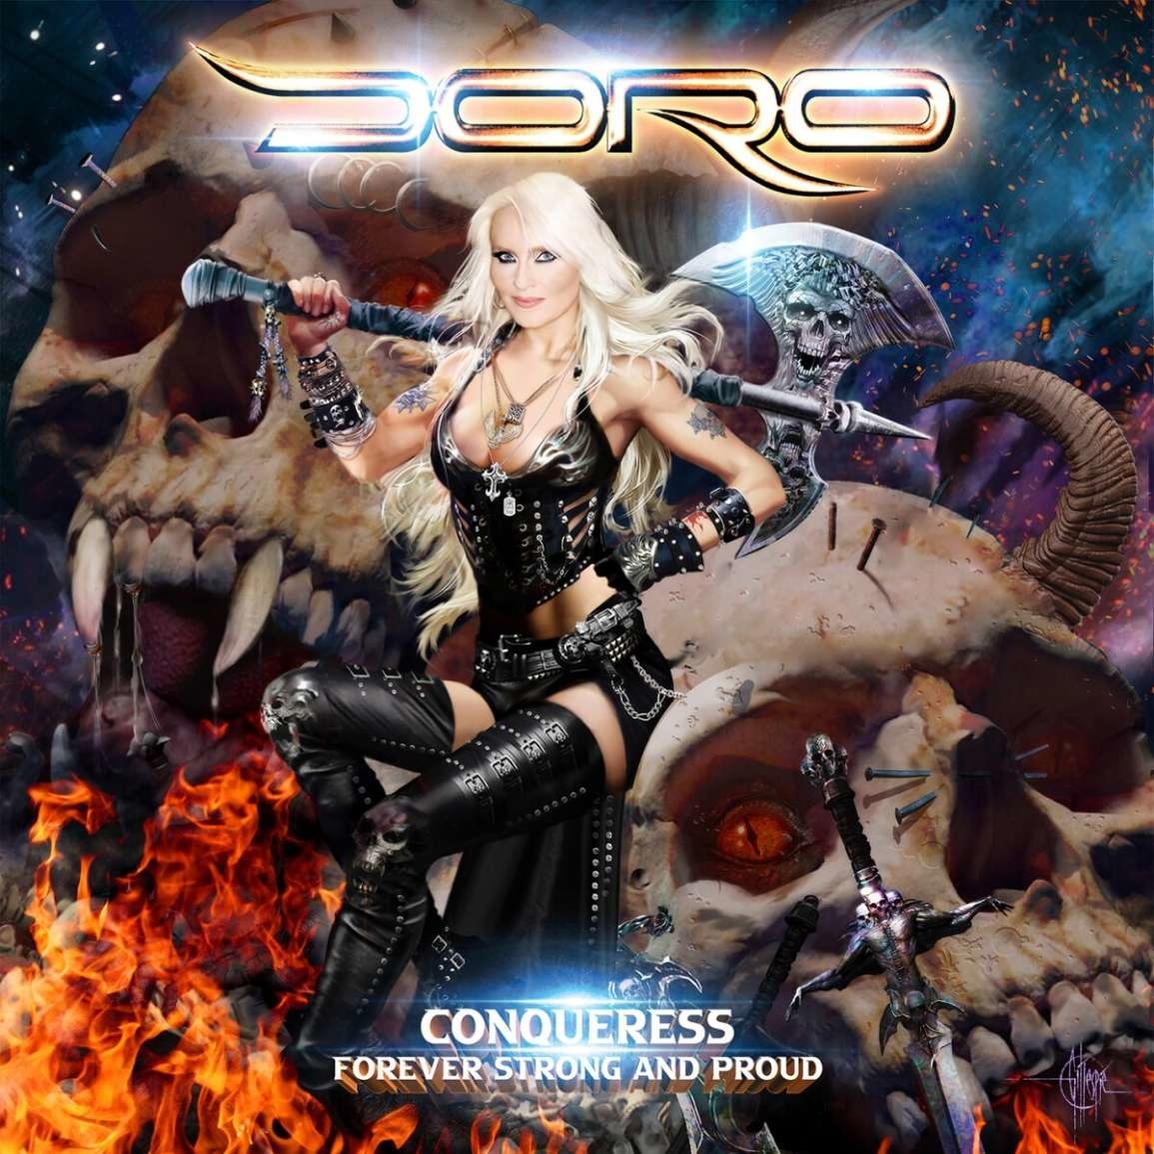 and - - Forever - (Vinyl) Strong Conqueress Doro Proud